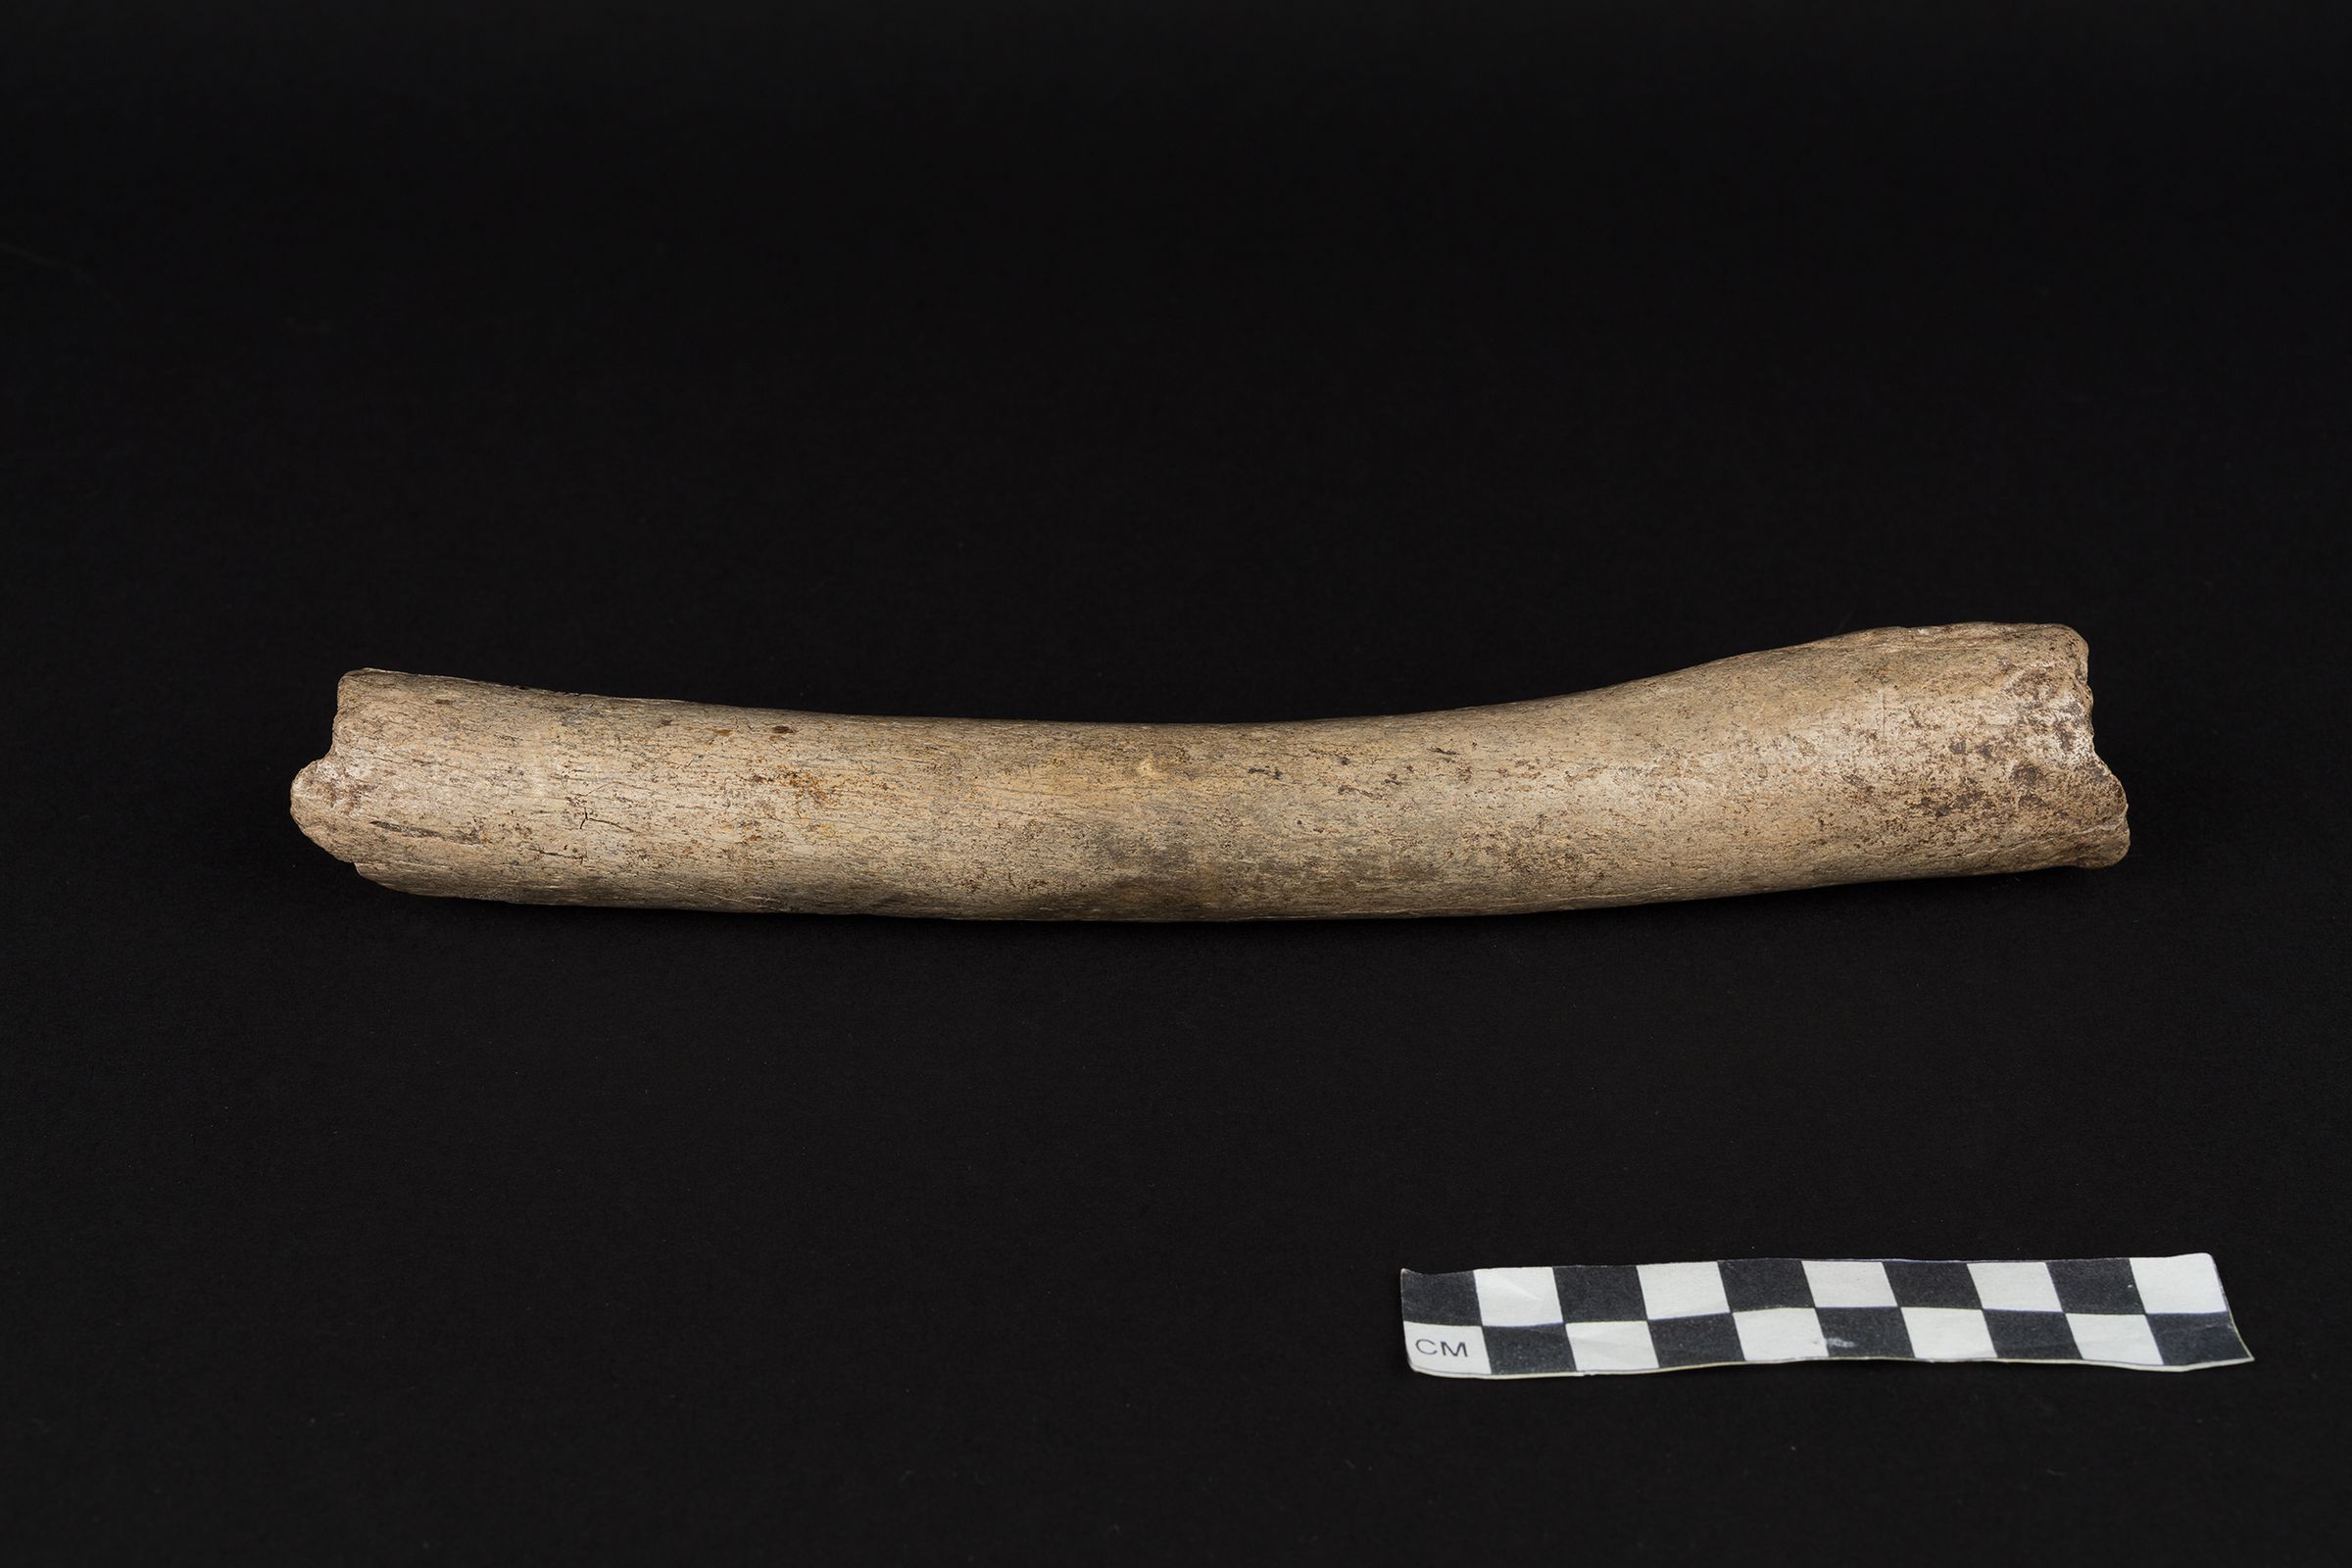 A Neanderthal thigh bone known as the Hohlenstein-Stadel femur, discovered in German in 1937.